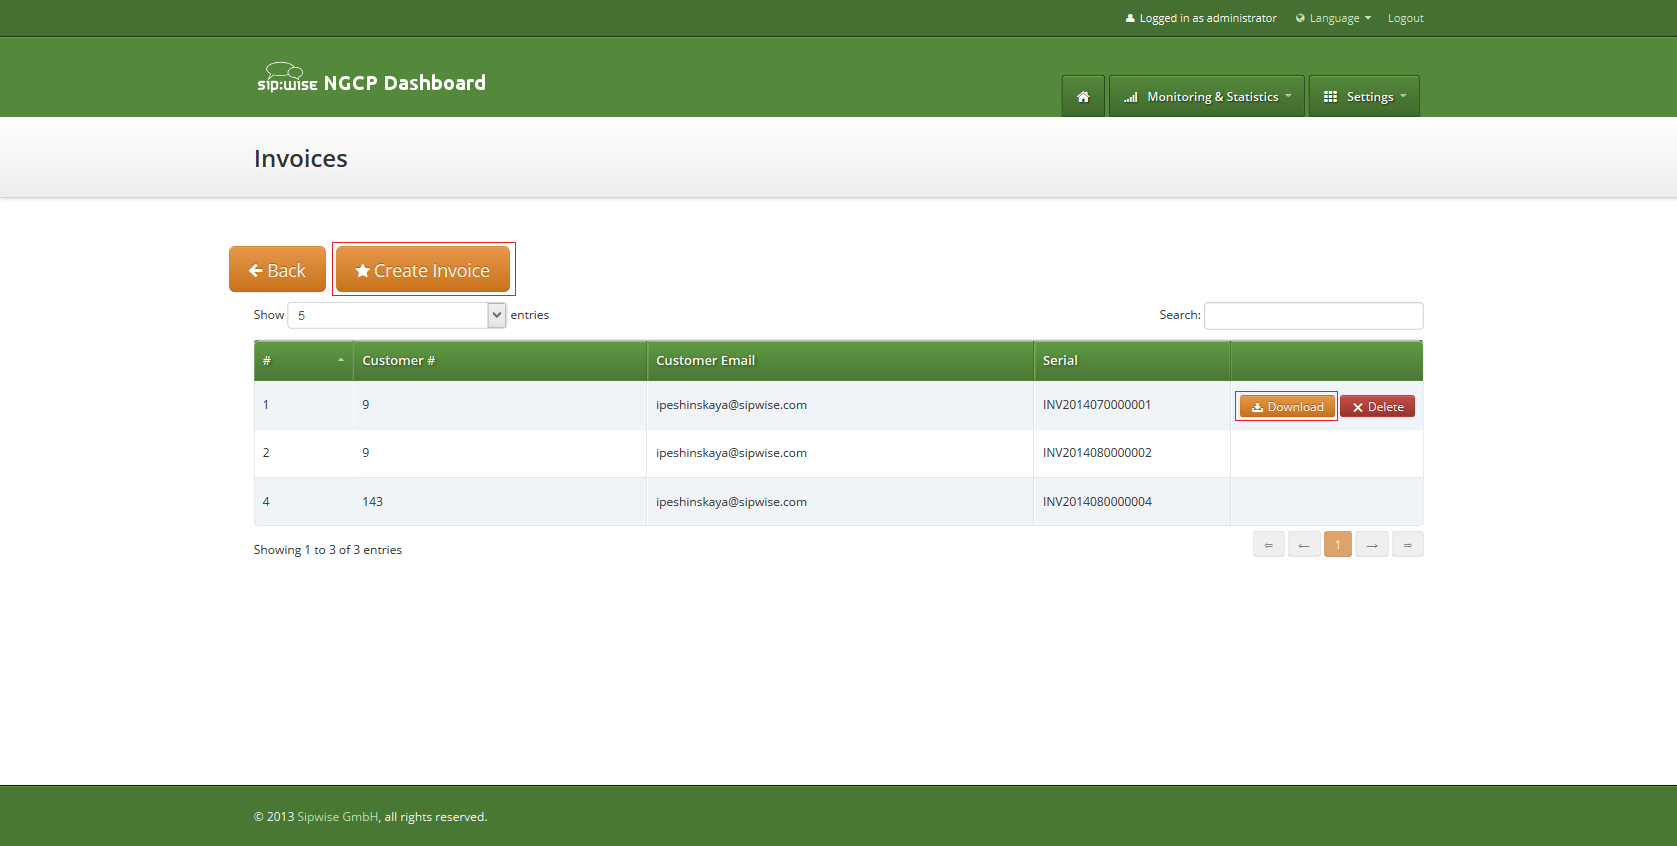 Invoice management interface